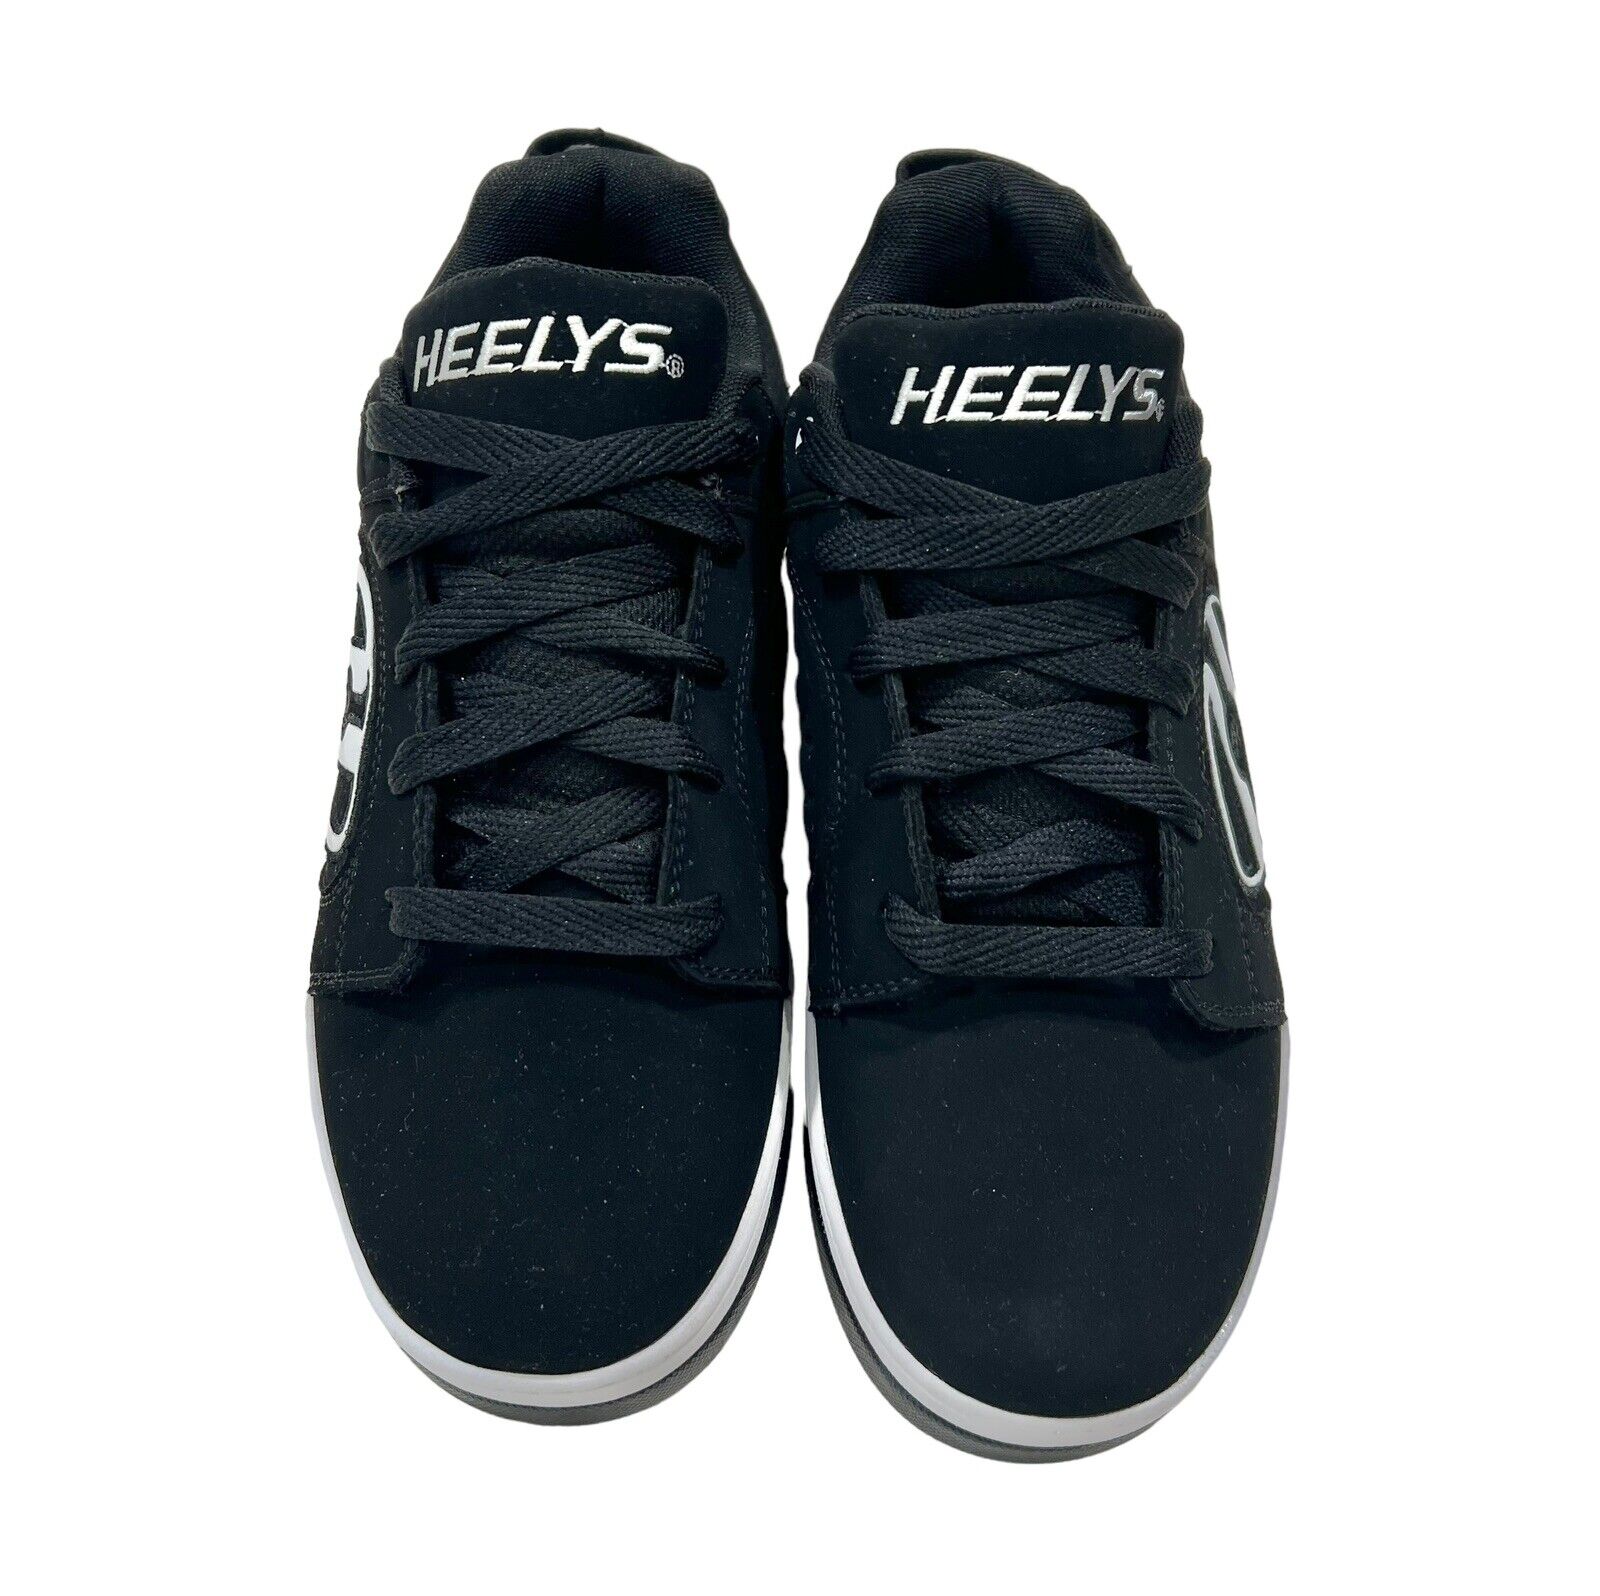 Heelys Voyager HE100713 Skate Shoes Men’s Size 10 Black & White Very Clean